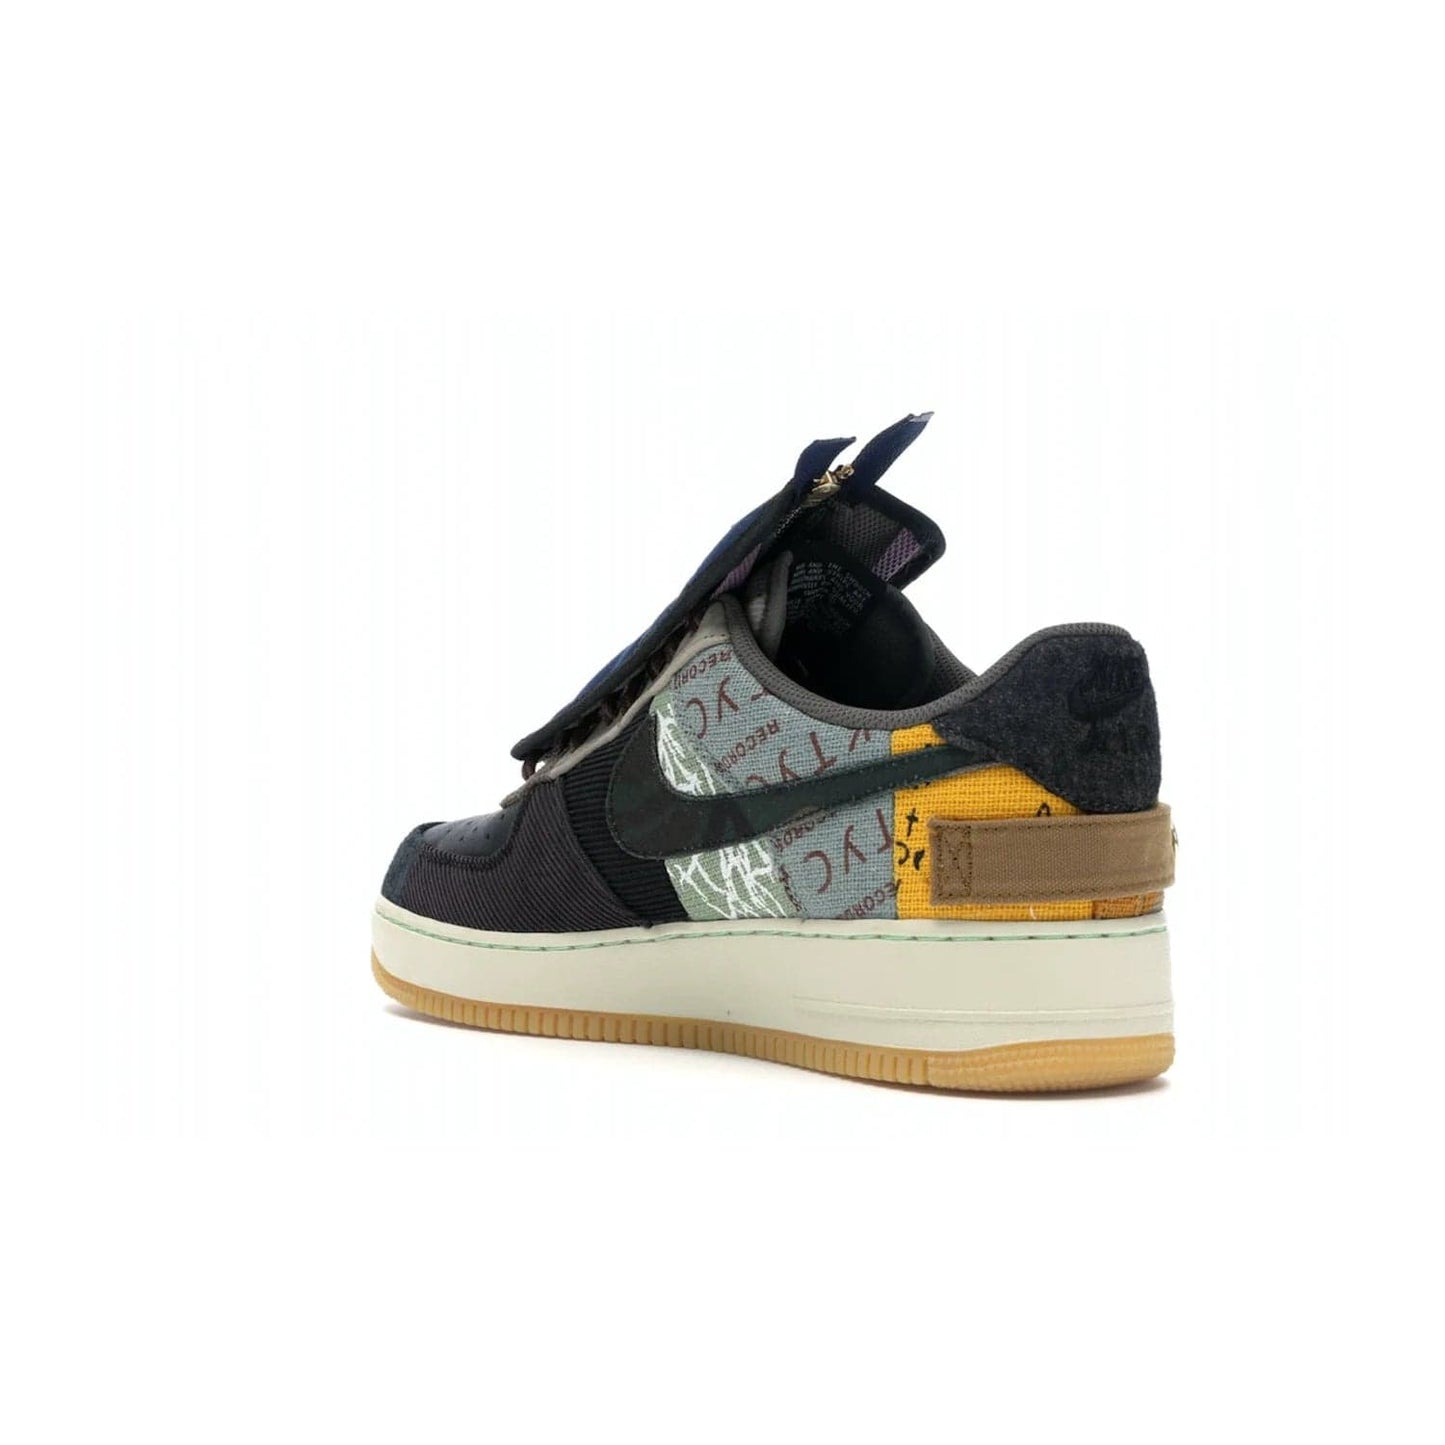 Nike Air Force 1 Low Travis Scott Cactus Jack - Image 24 - Only at www.BallersClubKickz.com - The Nike Air Force 1 Low Travis Scott Cactus Jack features a unique, multi-colored patchwork upper with muted bronze and fossil accents. Includes detachable lace cover, brass zipper, and Cactus Jack insignias. A sail midsole, gum rubber outsole complete the eye-catching design. Perfect for comfort and style with unexpected touches of detail.